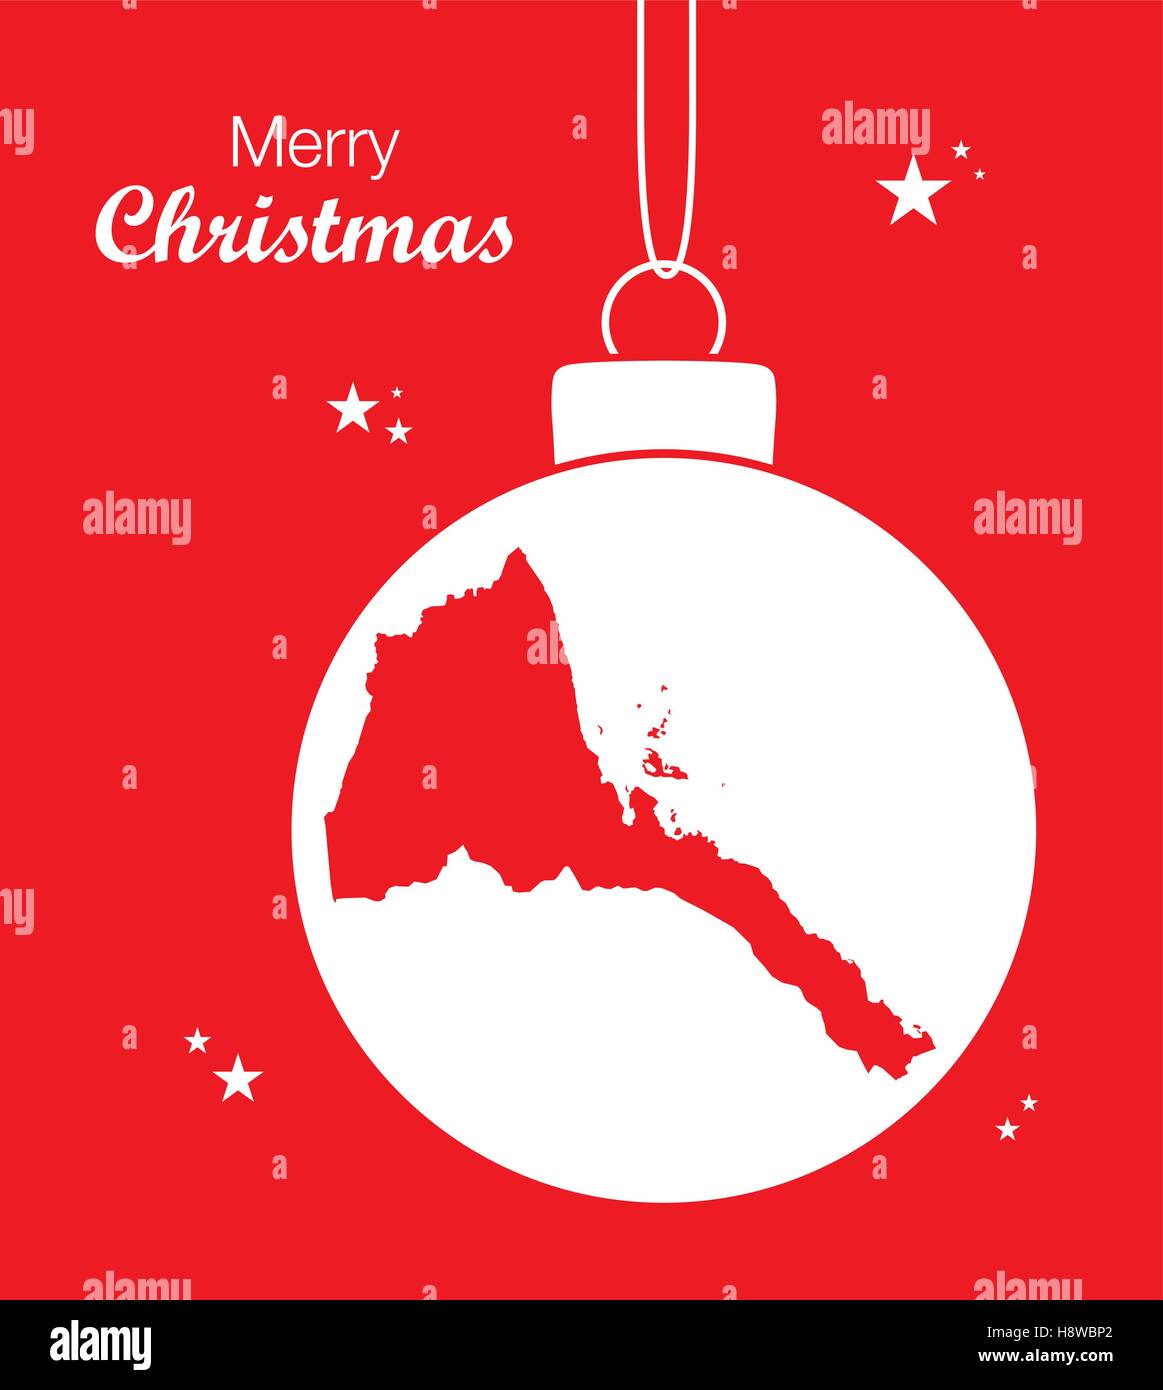 Merry Christmas illustration theme with map of Eritrea Stock Vector